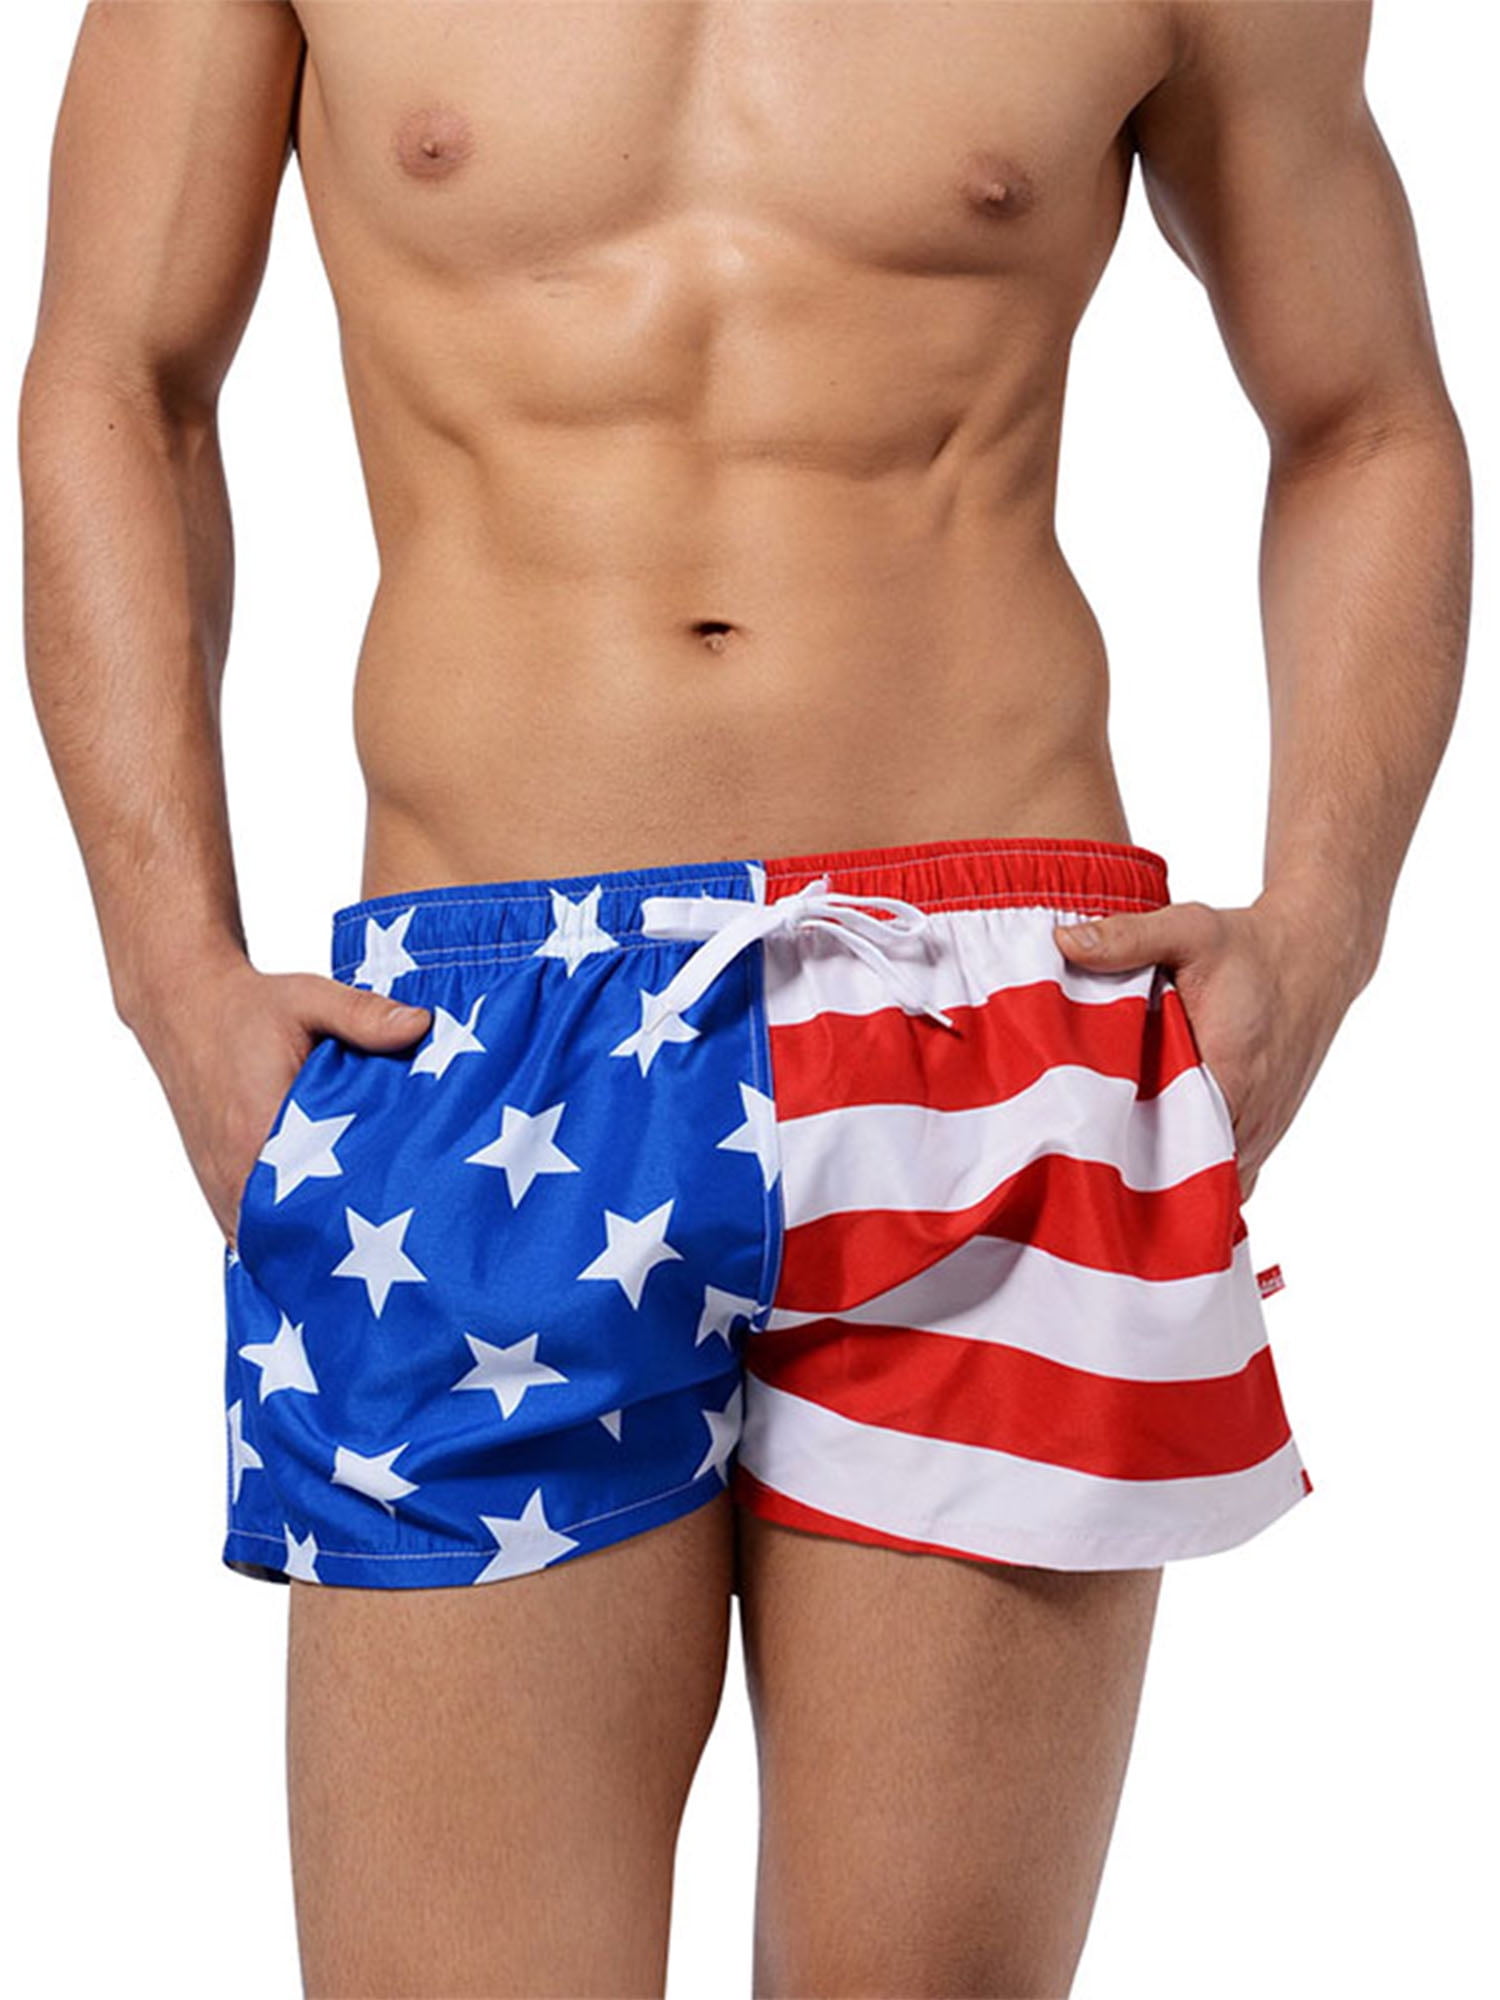 Mens Swim Trunks Quick Dry American Flag Cat in Space Suit Beach Board Shorts Bathing Suits with Pockets